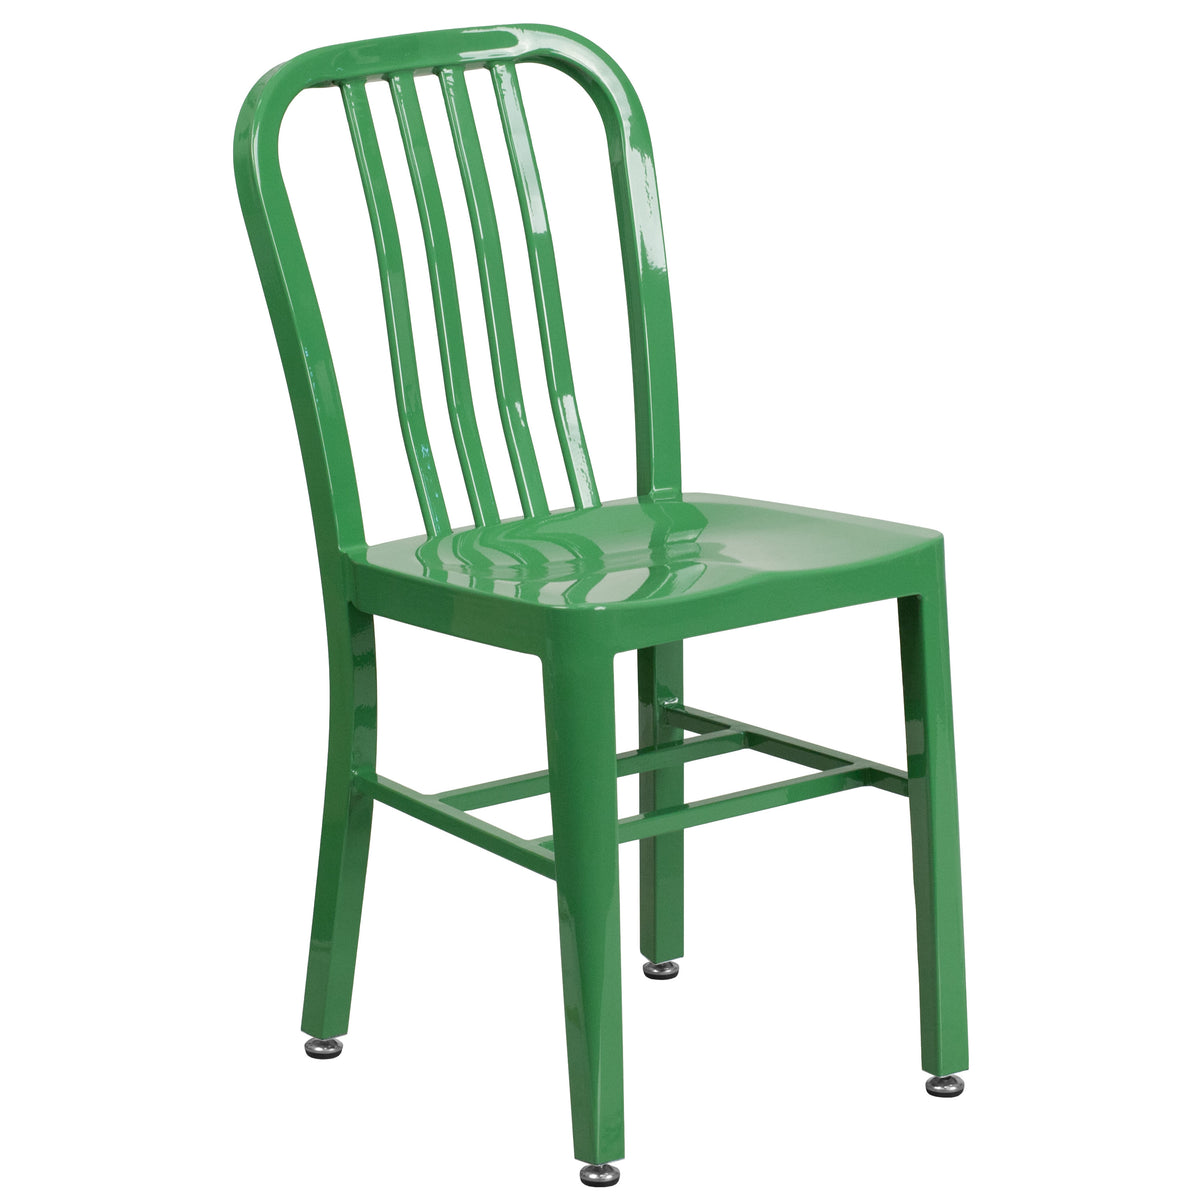 Green |#| 30inch Round Green Metal Indoor-Outdoor Table Set with 4 Vertical Slat Back Chairs